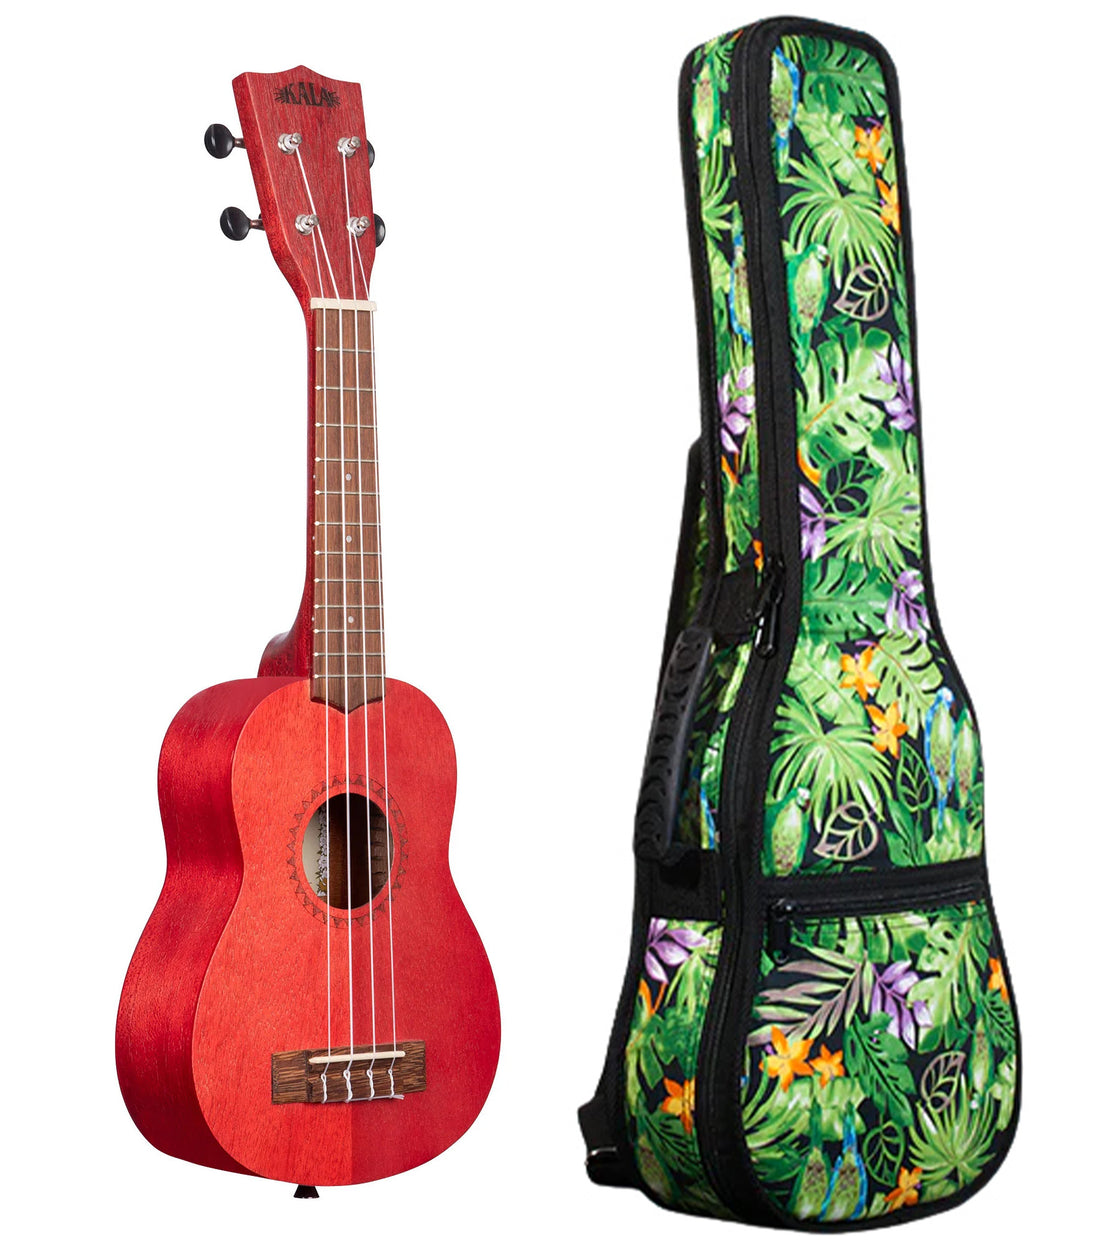 KA-MRT-RED-S Adobe Red Watercolor Meranti Soprano Ukulele Includes Gigbag Floral Print, Padded with Backpack Straps